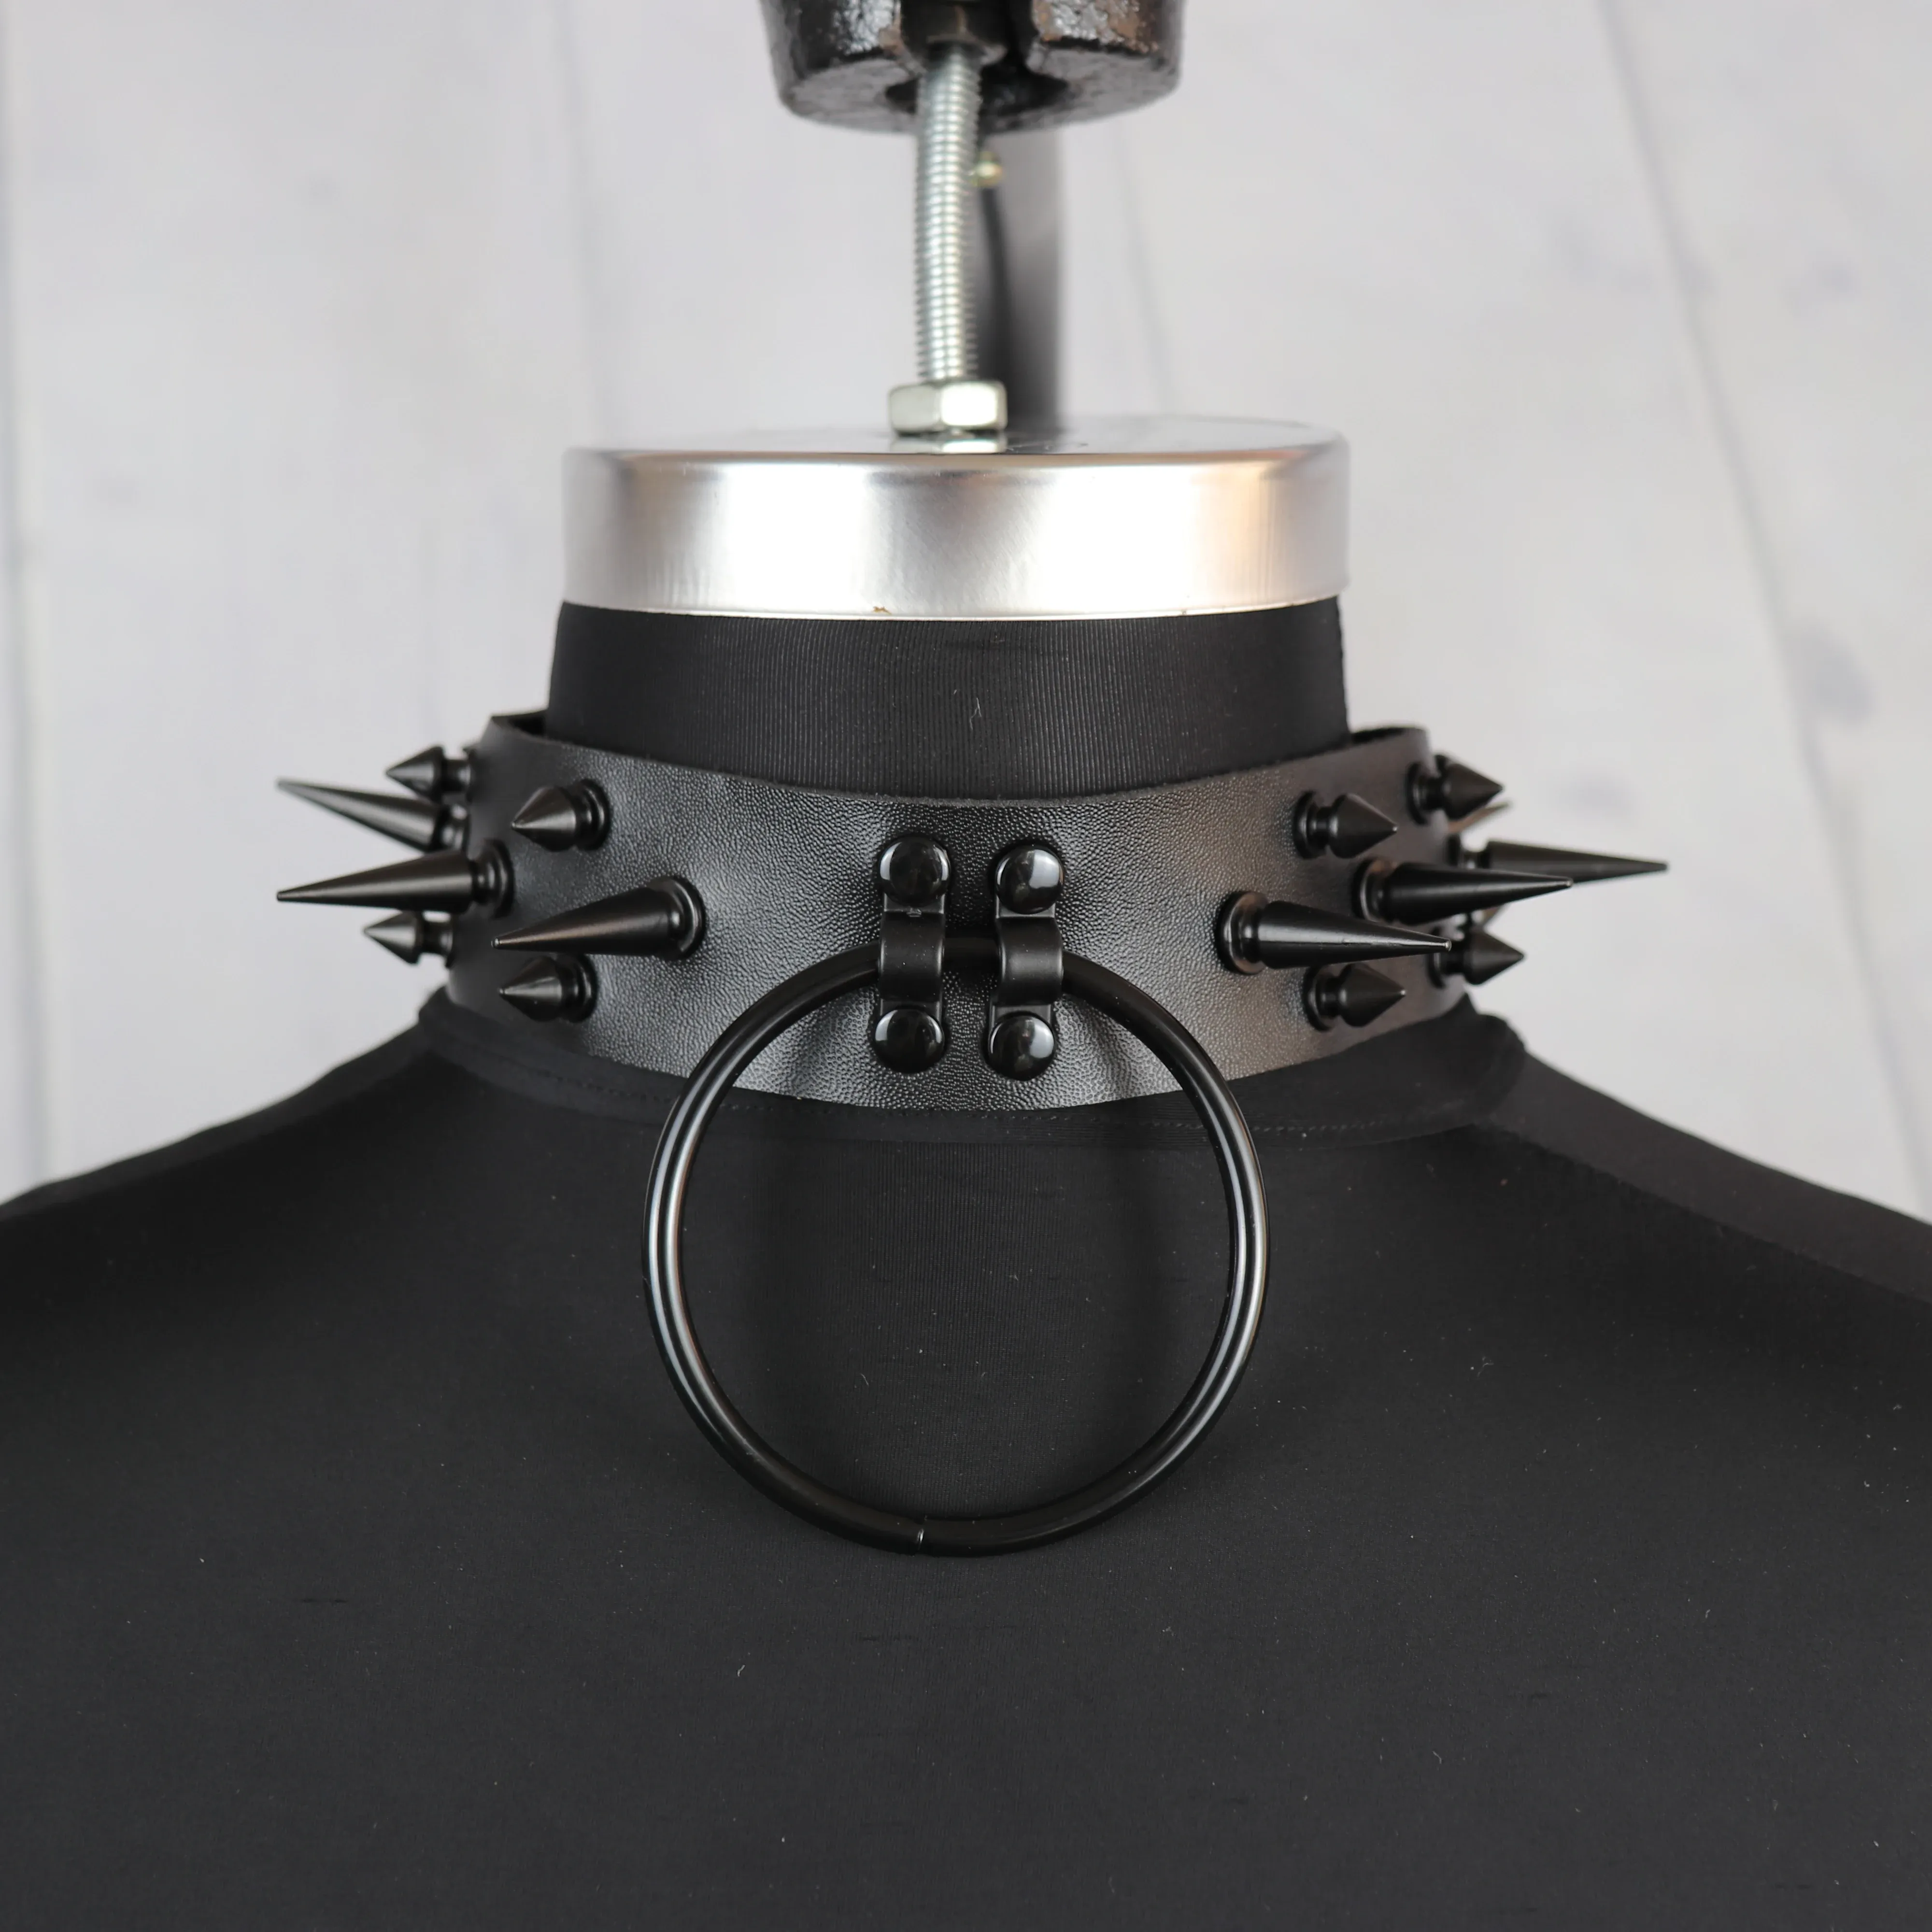 Torques UYEE Gothic Leather Harness Choker Collar For Women Punk Choker Rivets Metal Neck Chocker Party Festival Goth Jewelry On Neck